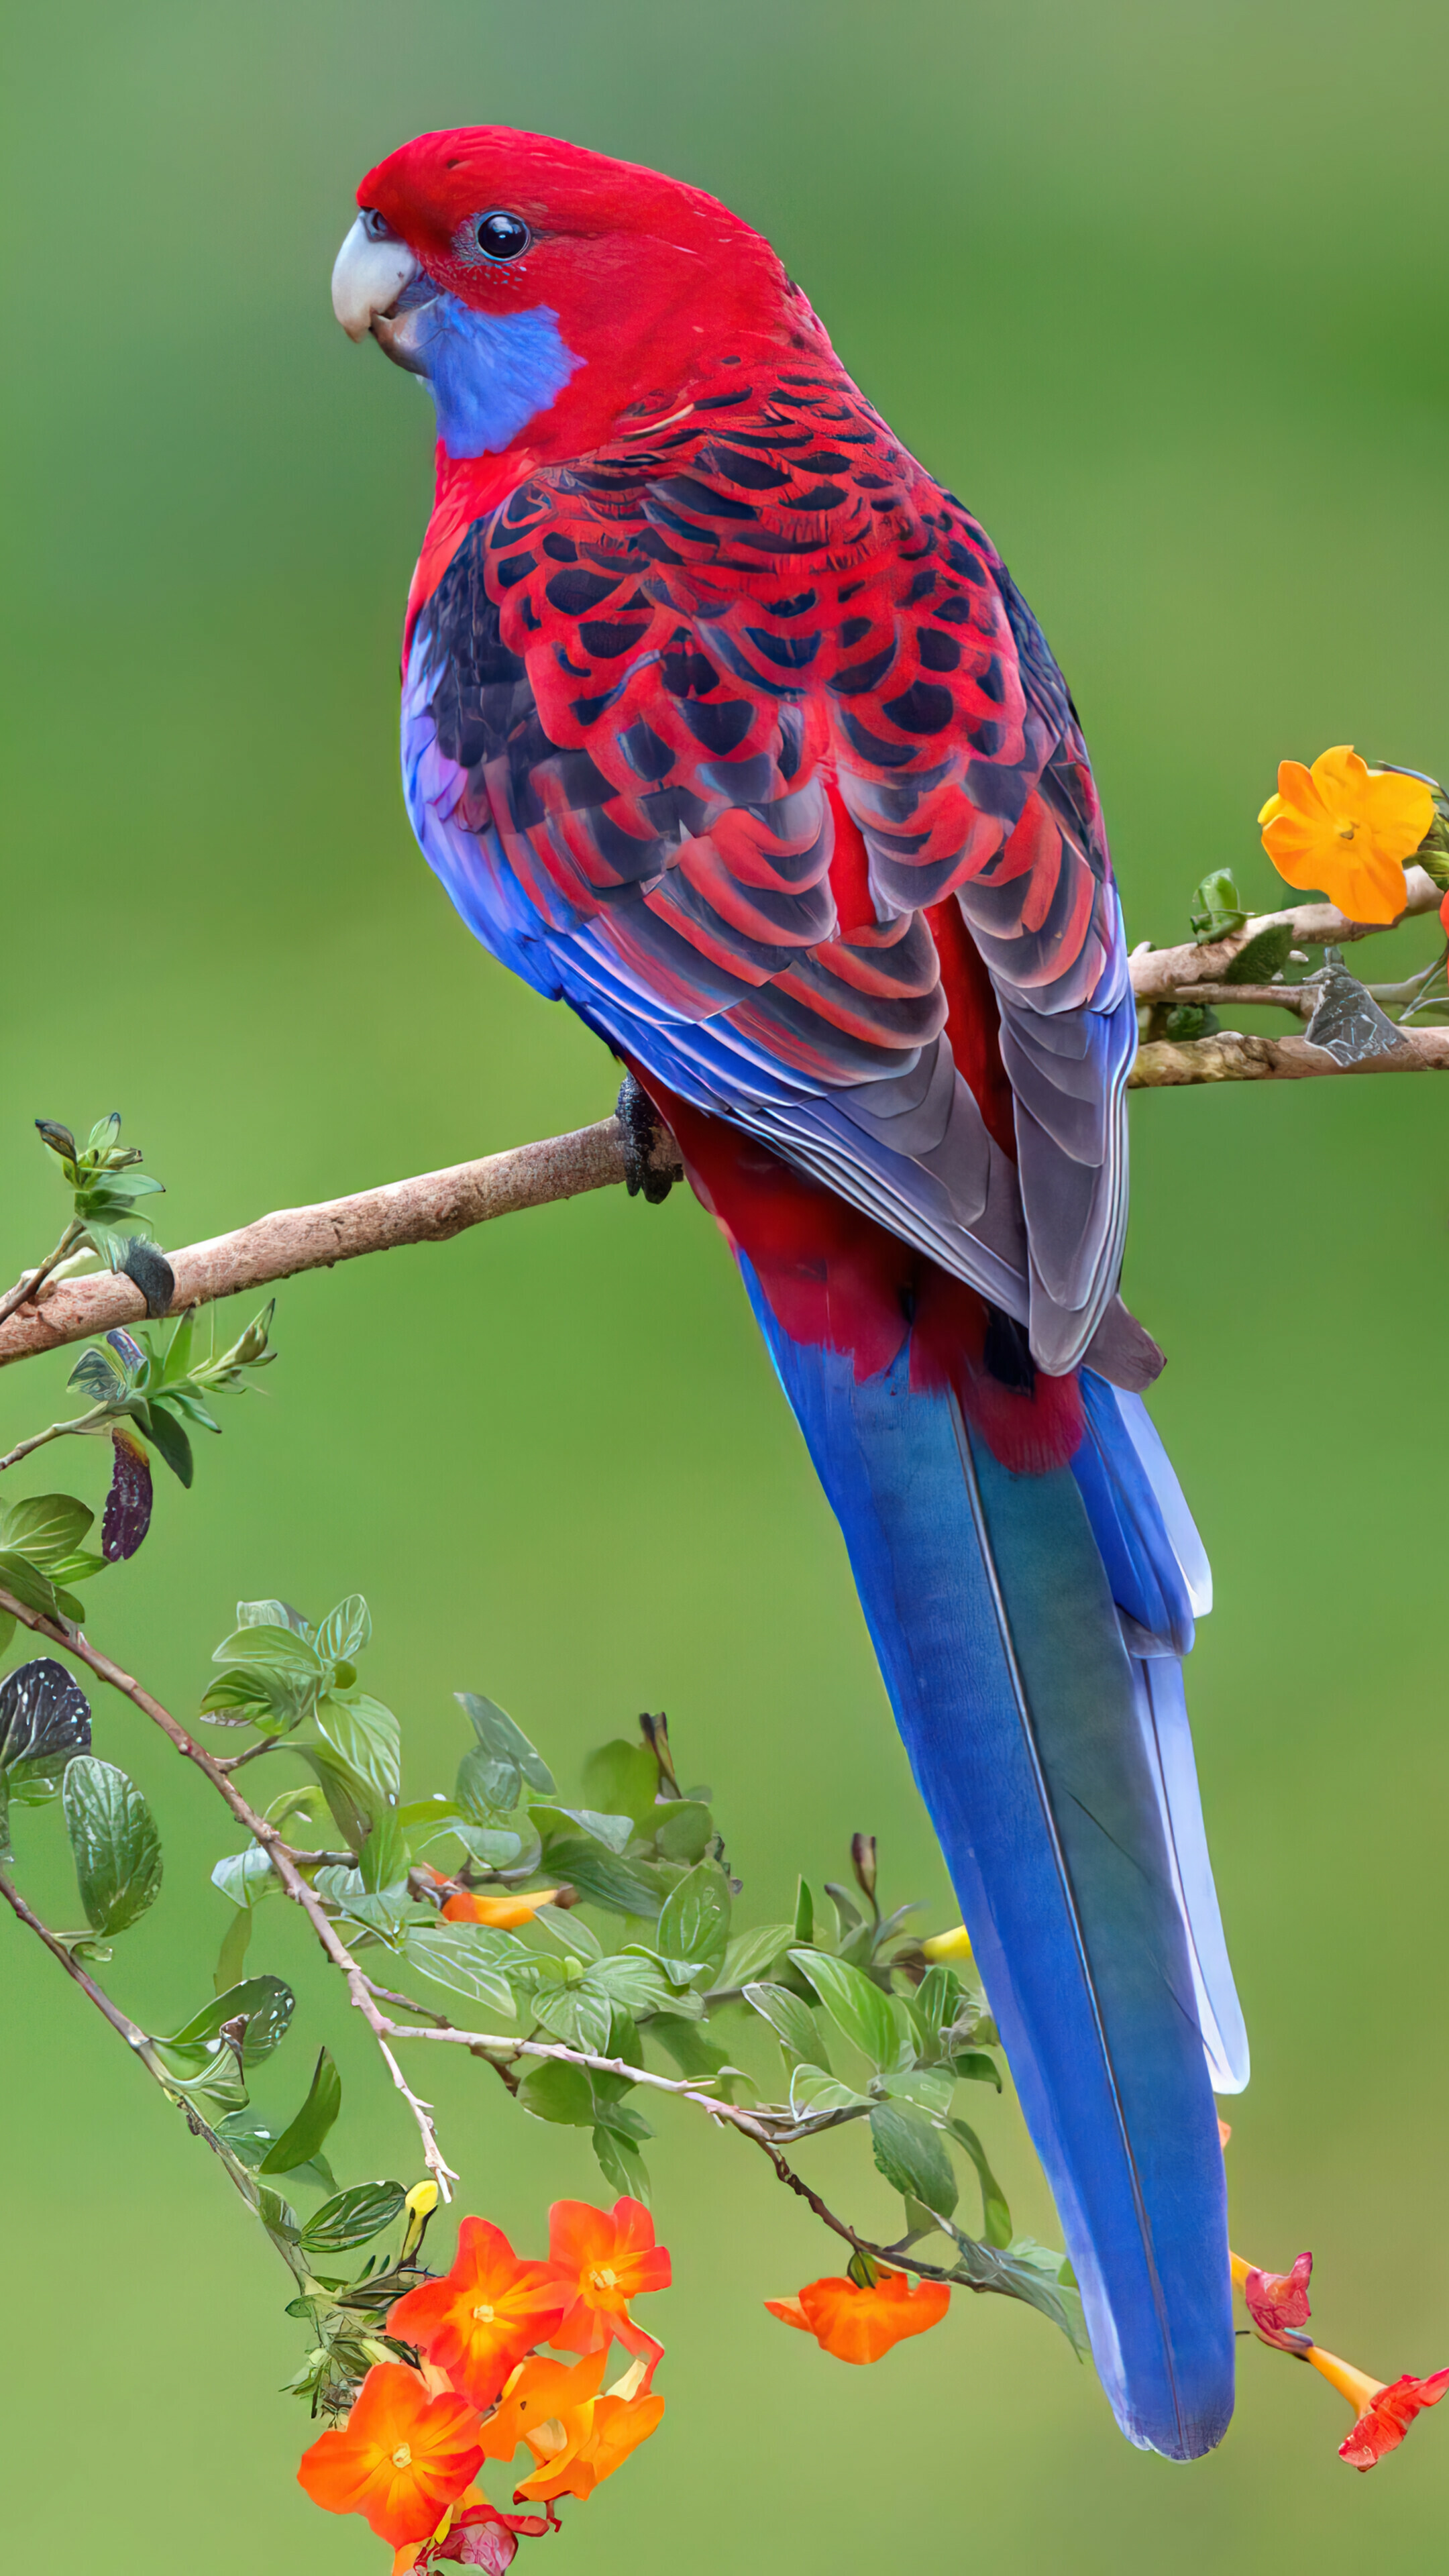 Parrot: Birds found mostly in tropical and subtropical regions. 2160x3840 4K Wallpaper.